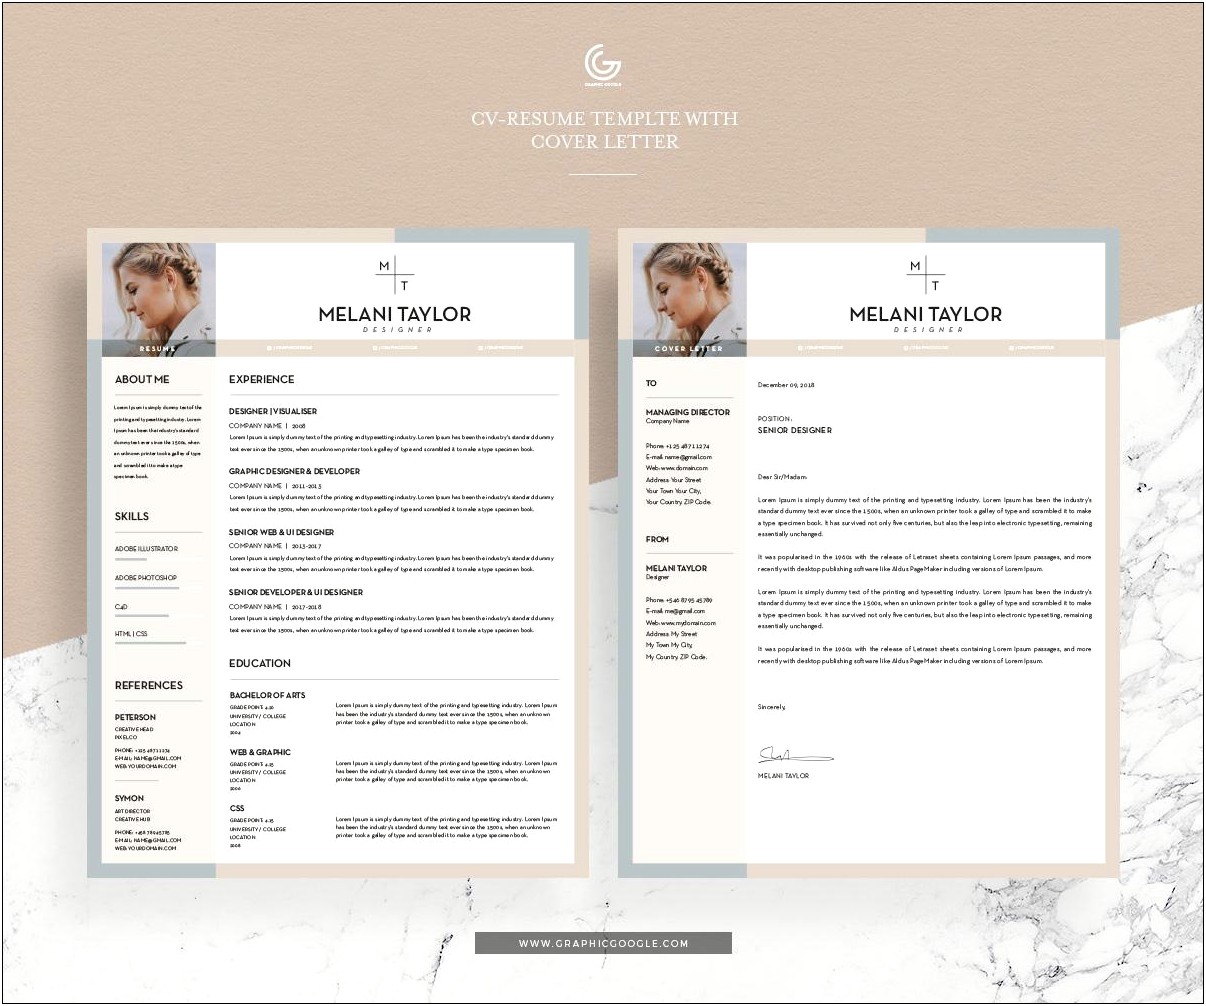 Graphic Designer Resume And Cover Letter